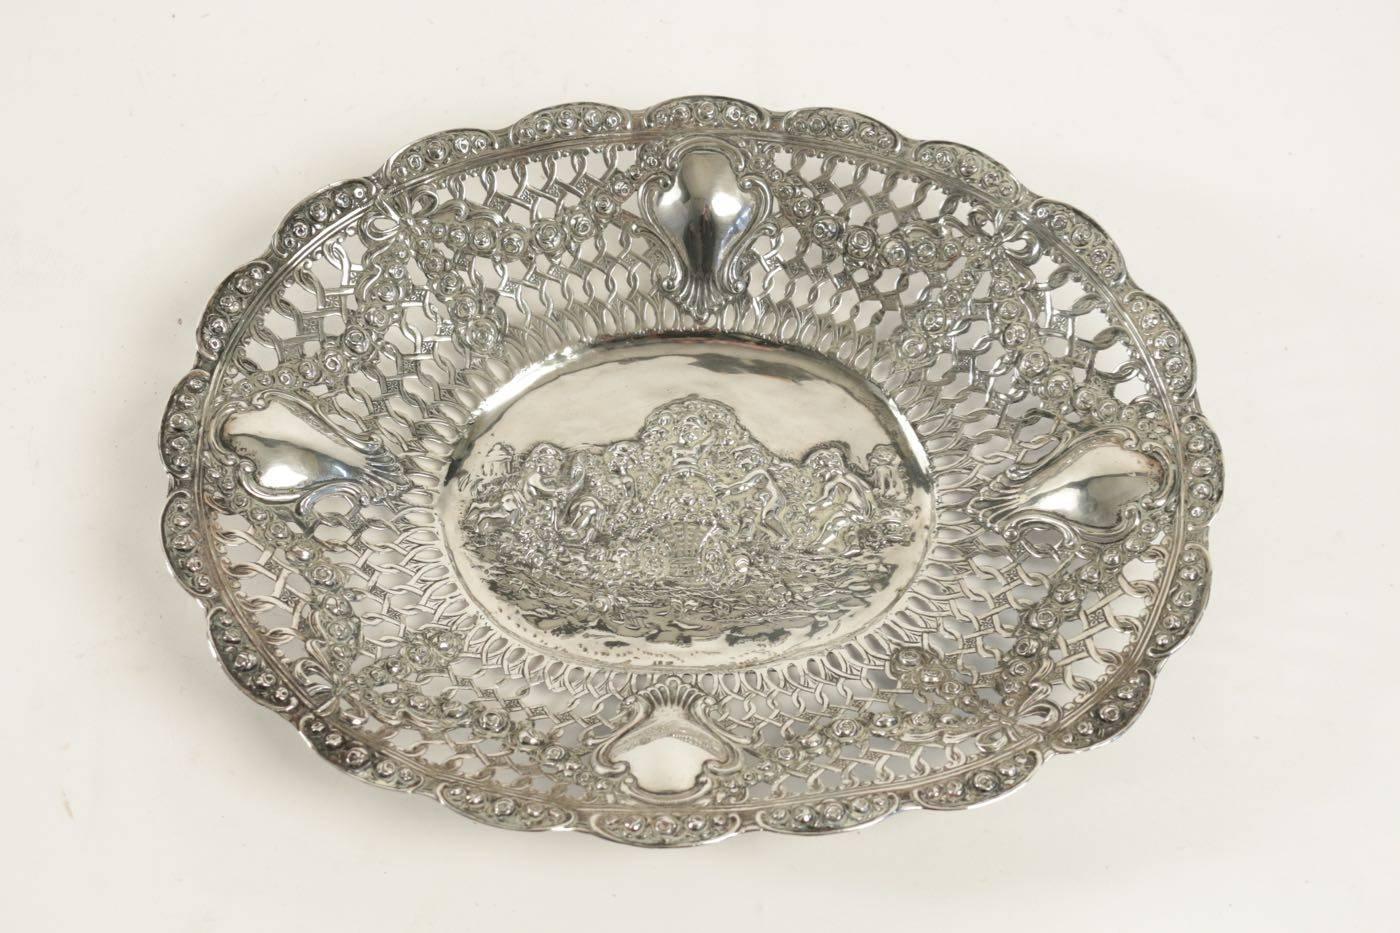 19th century European sterling silver pierced dish with a cherub motif in the centre. Immaculate detailing.
Five cherub and garlands of flowers
Cherub scene playing entwined in garlands of flowers
Measures: 27 cm X 33 cm X 5 cm.